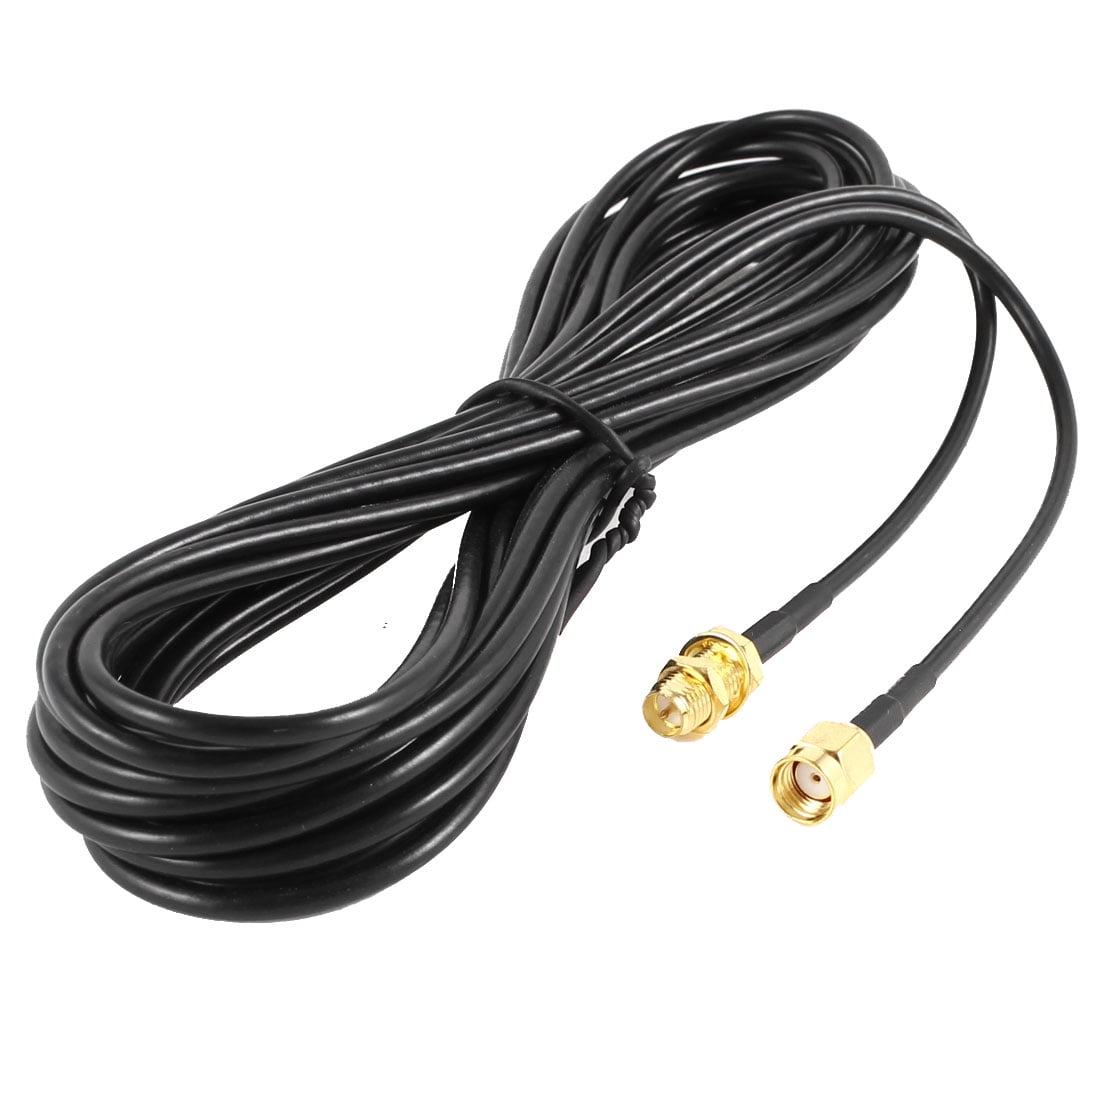 RP-SMA Male to N Type Male WiFi Antenna Adapter Cable 40 feet for WiFi Extender 